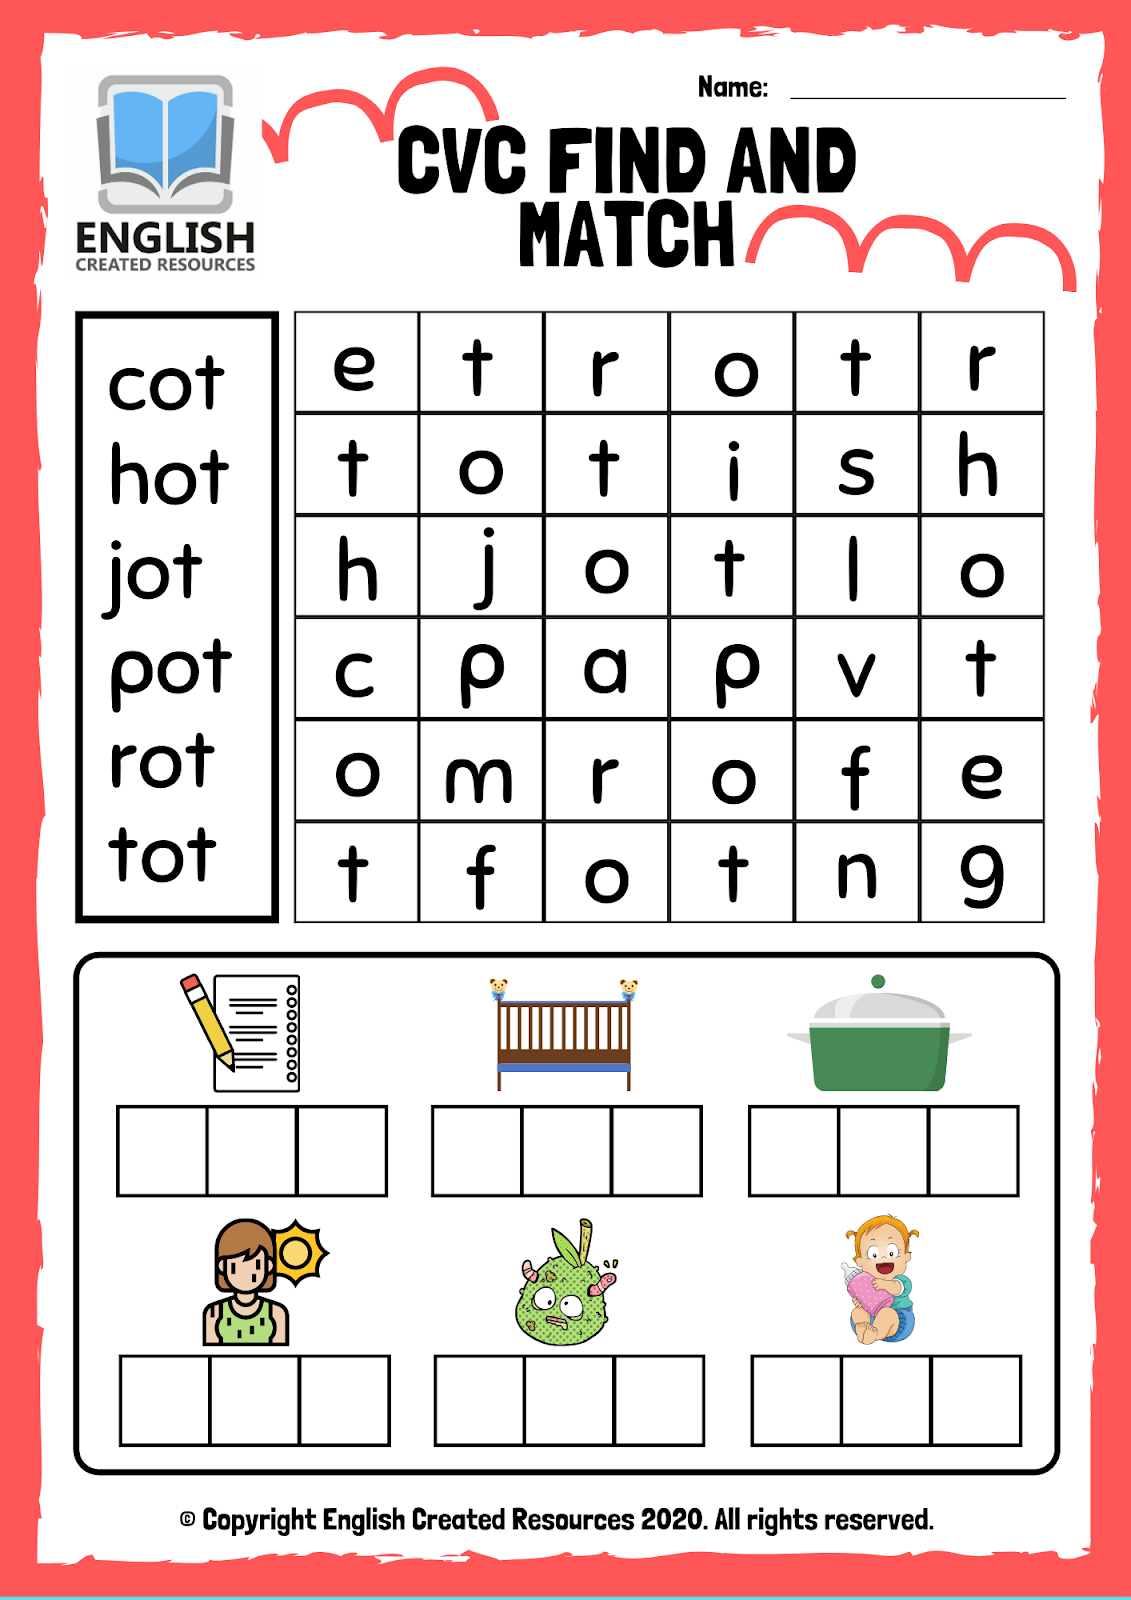 cvc-words-find-and-match-worksheets-english-created-resources